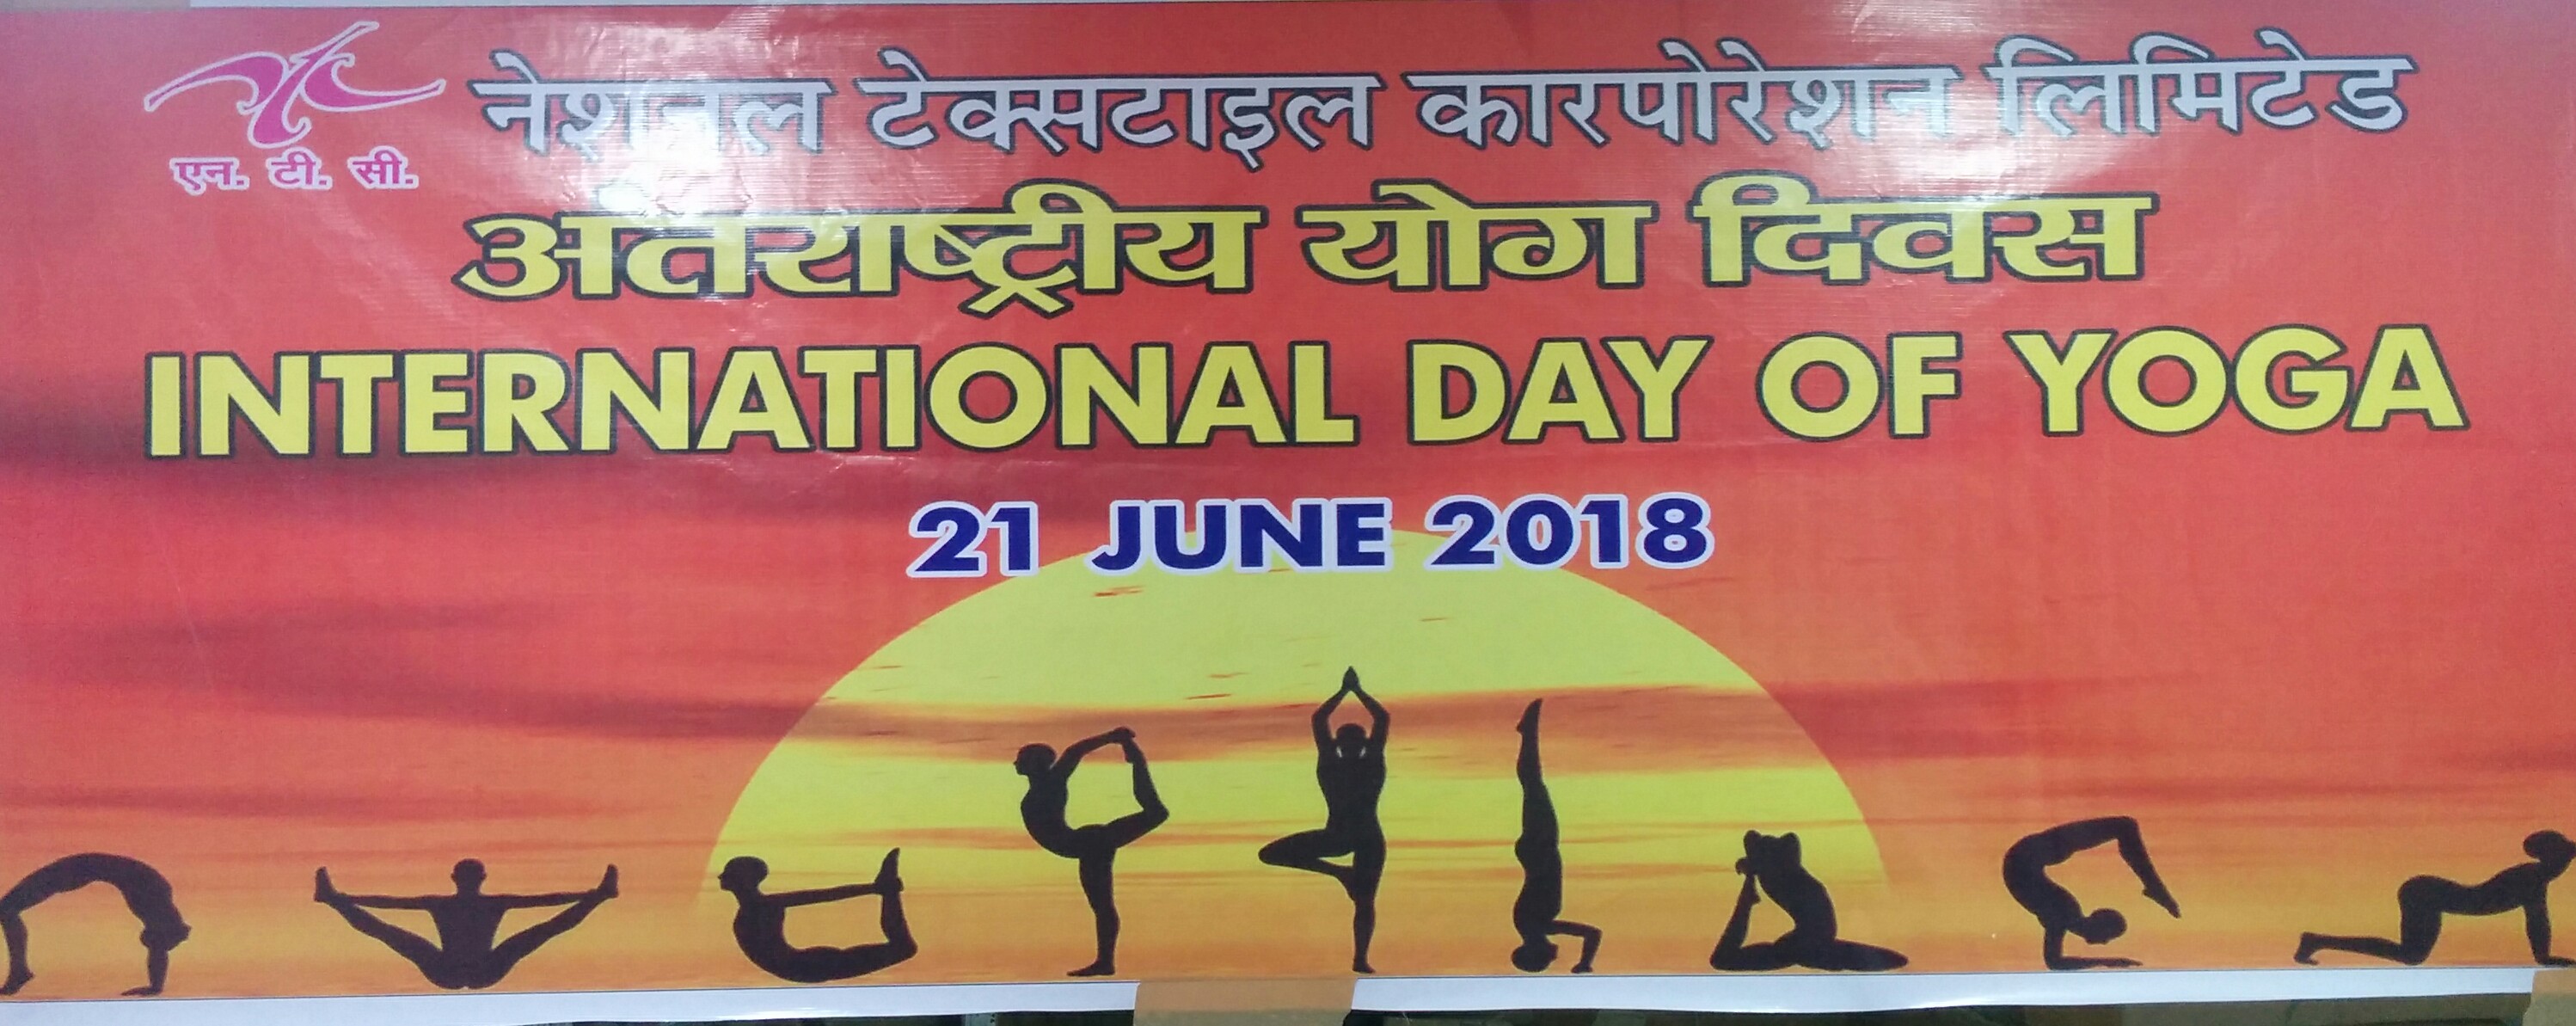 International Yoga Day 21st June 2018 at NTCL 